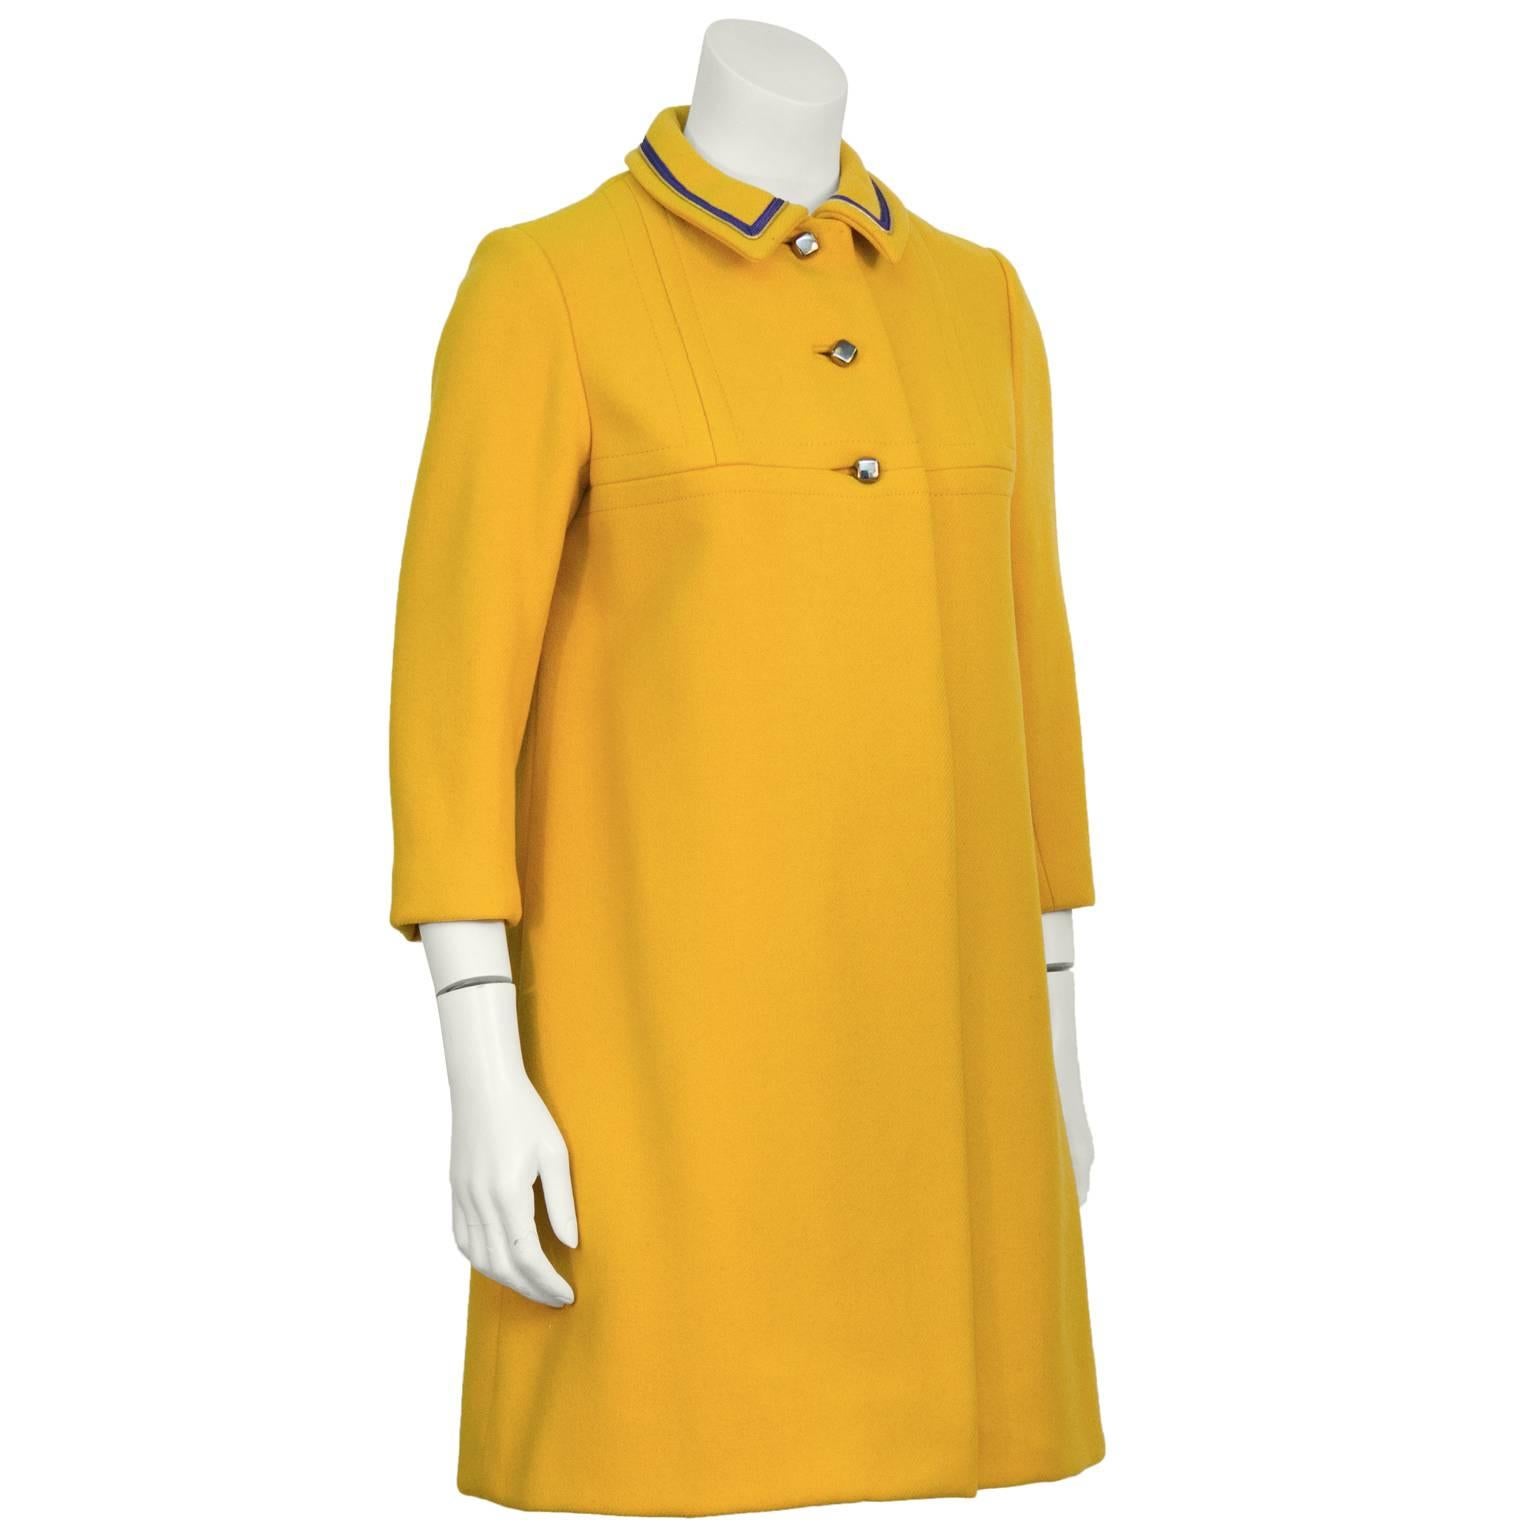 Anonymous marigold wool coat from the 1960's. The petite coat features a seamed yoke and unique pewter square buttons on the front. The collar is piped in a purple and gold ribbon detailing. Finished with a matching button at the back of the neck.